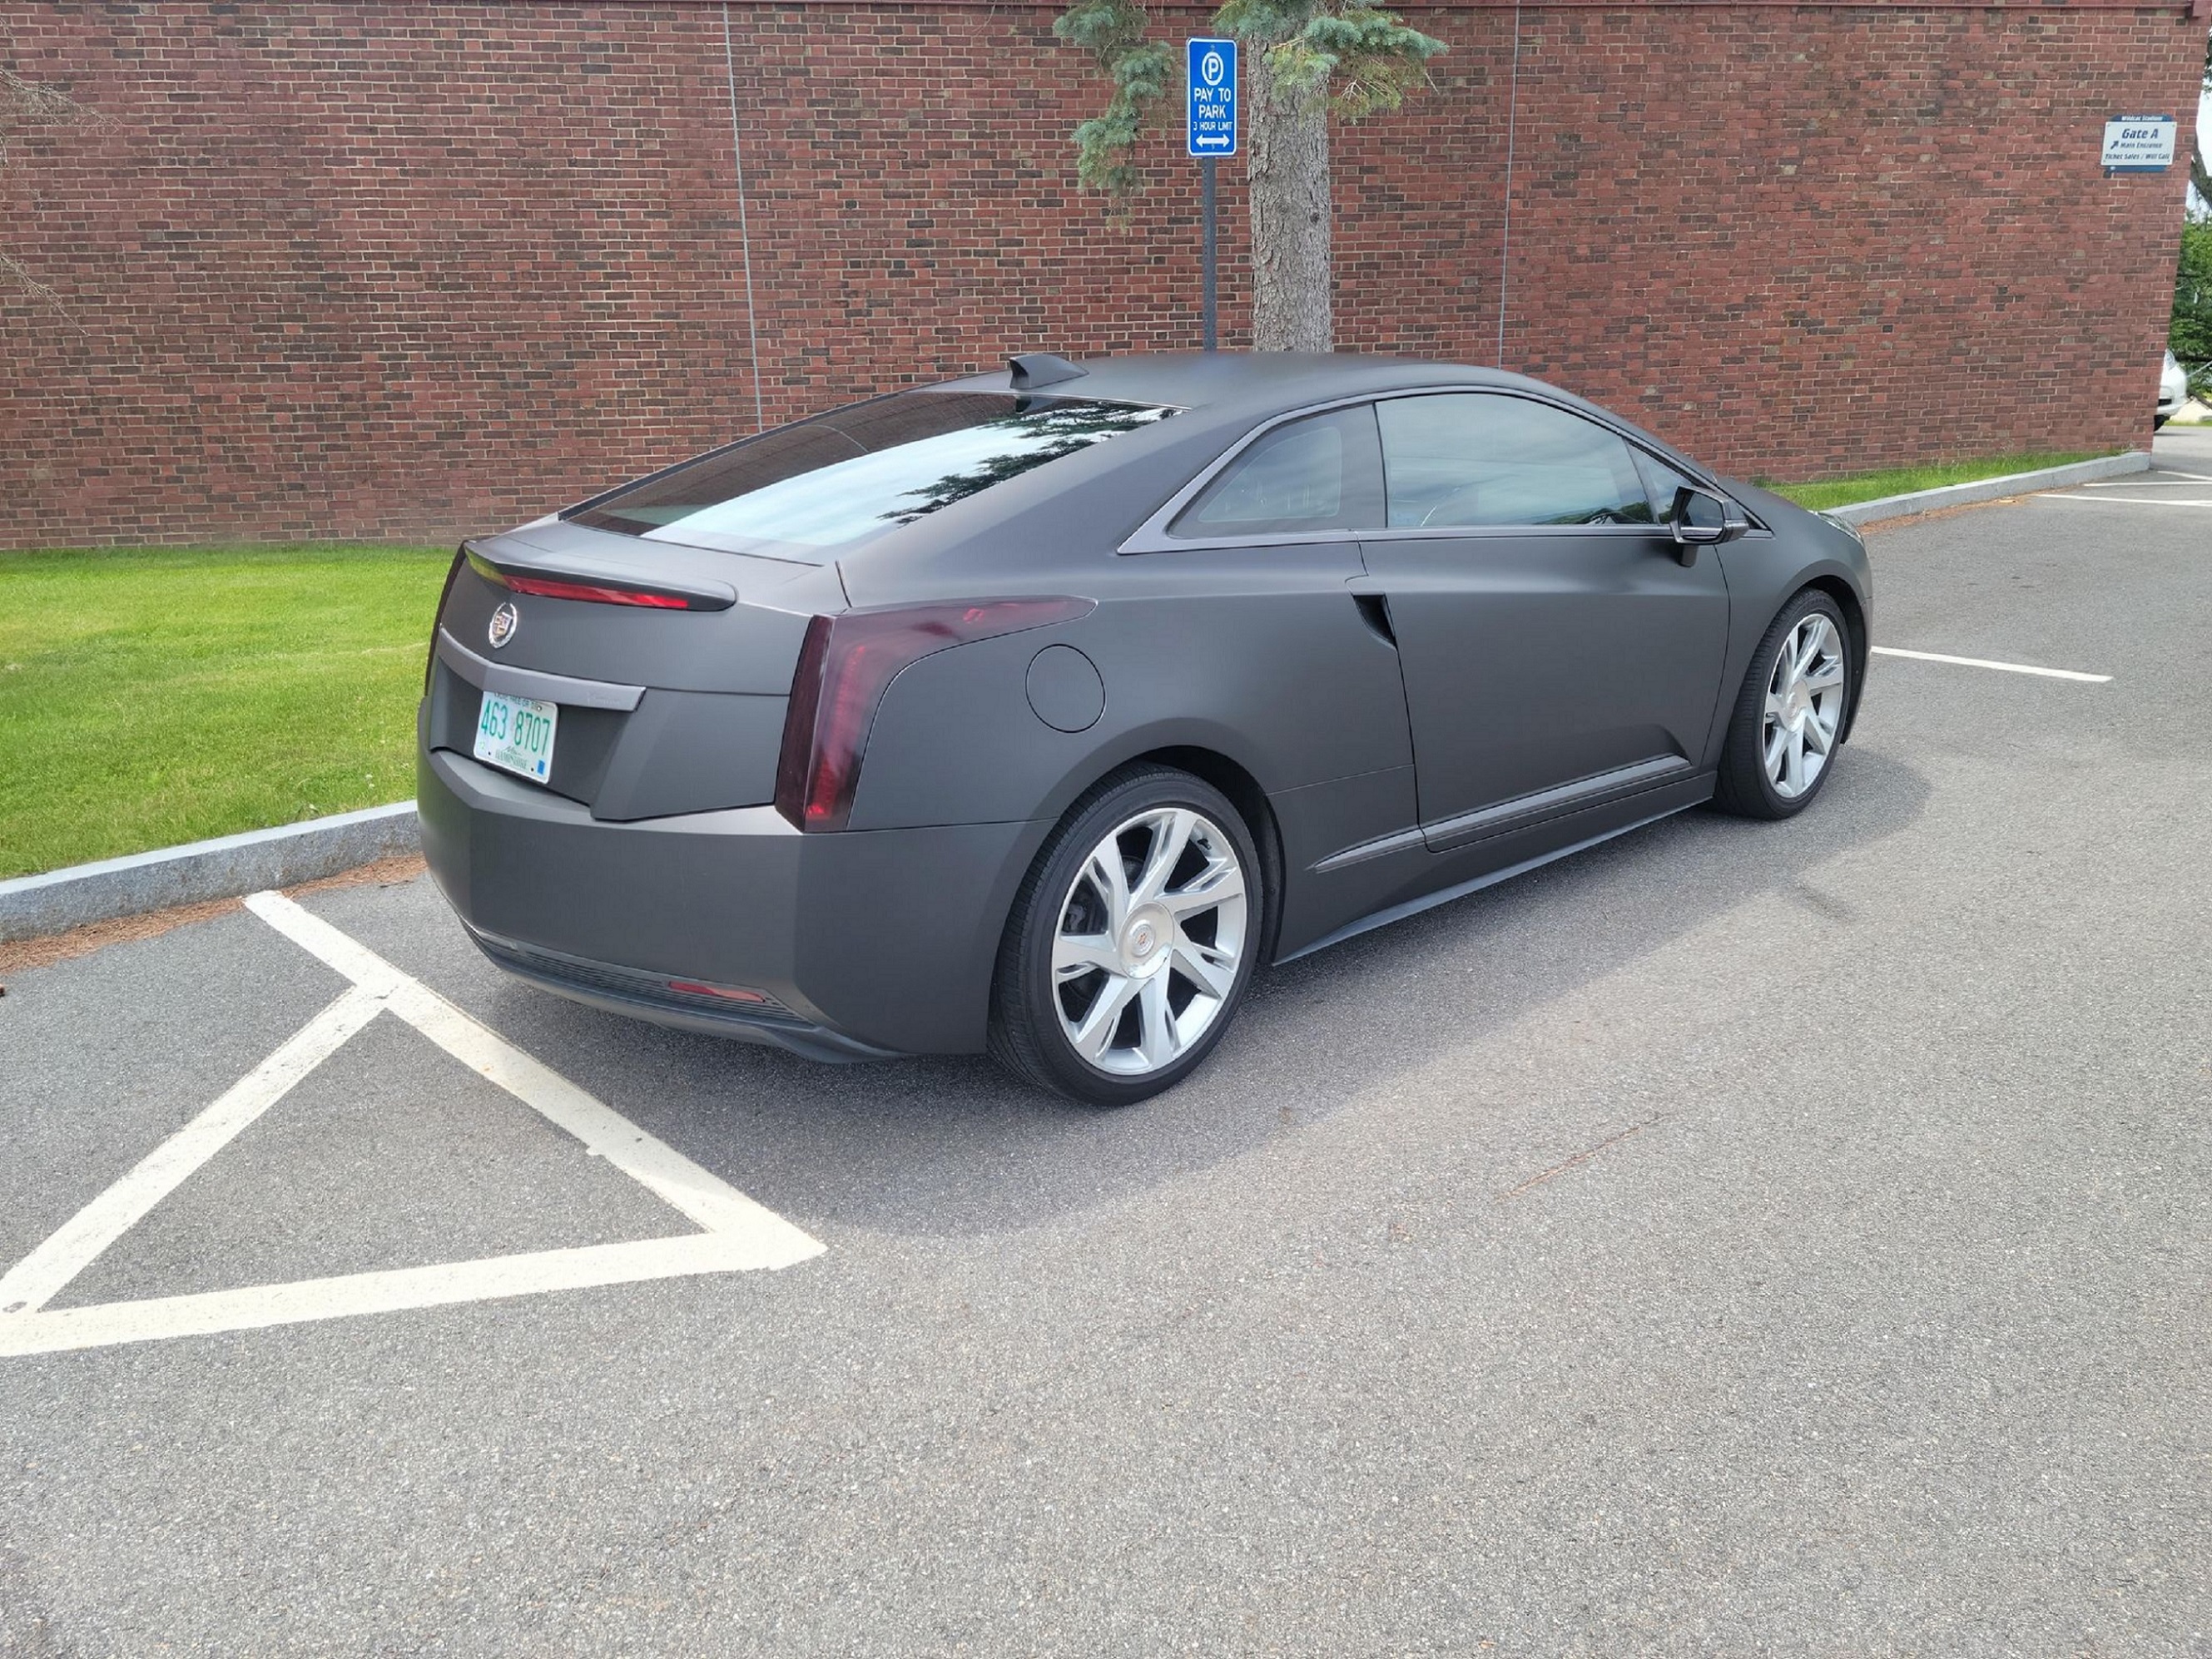 The rear 3/4 view of a black-wrapped 2014 Cadillac ELR in a parking lot